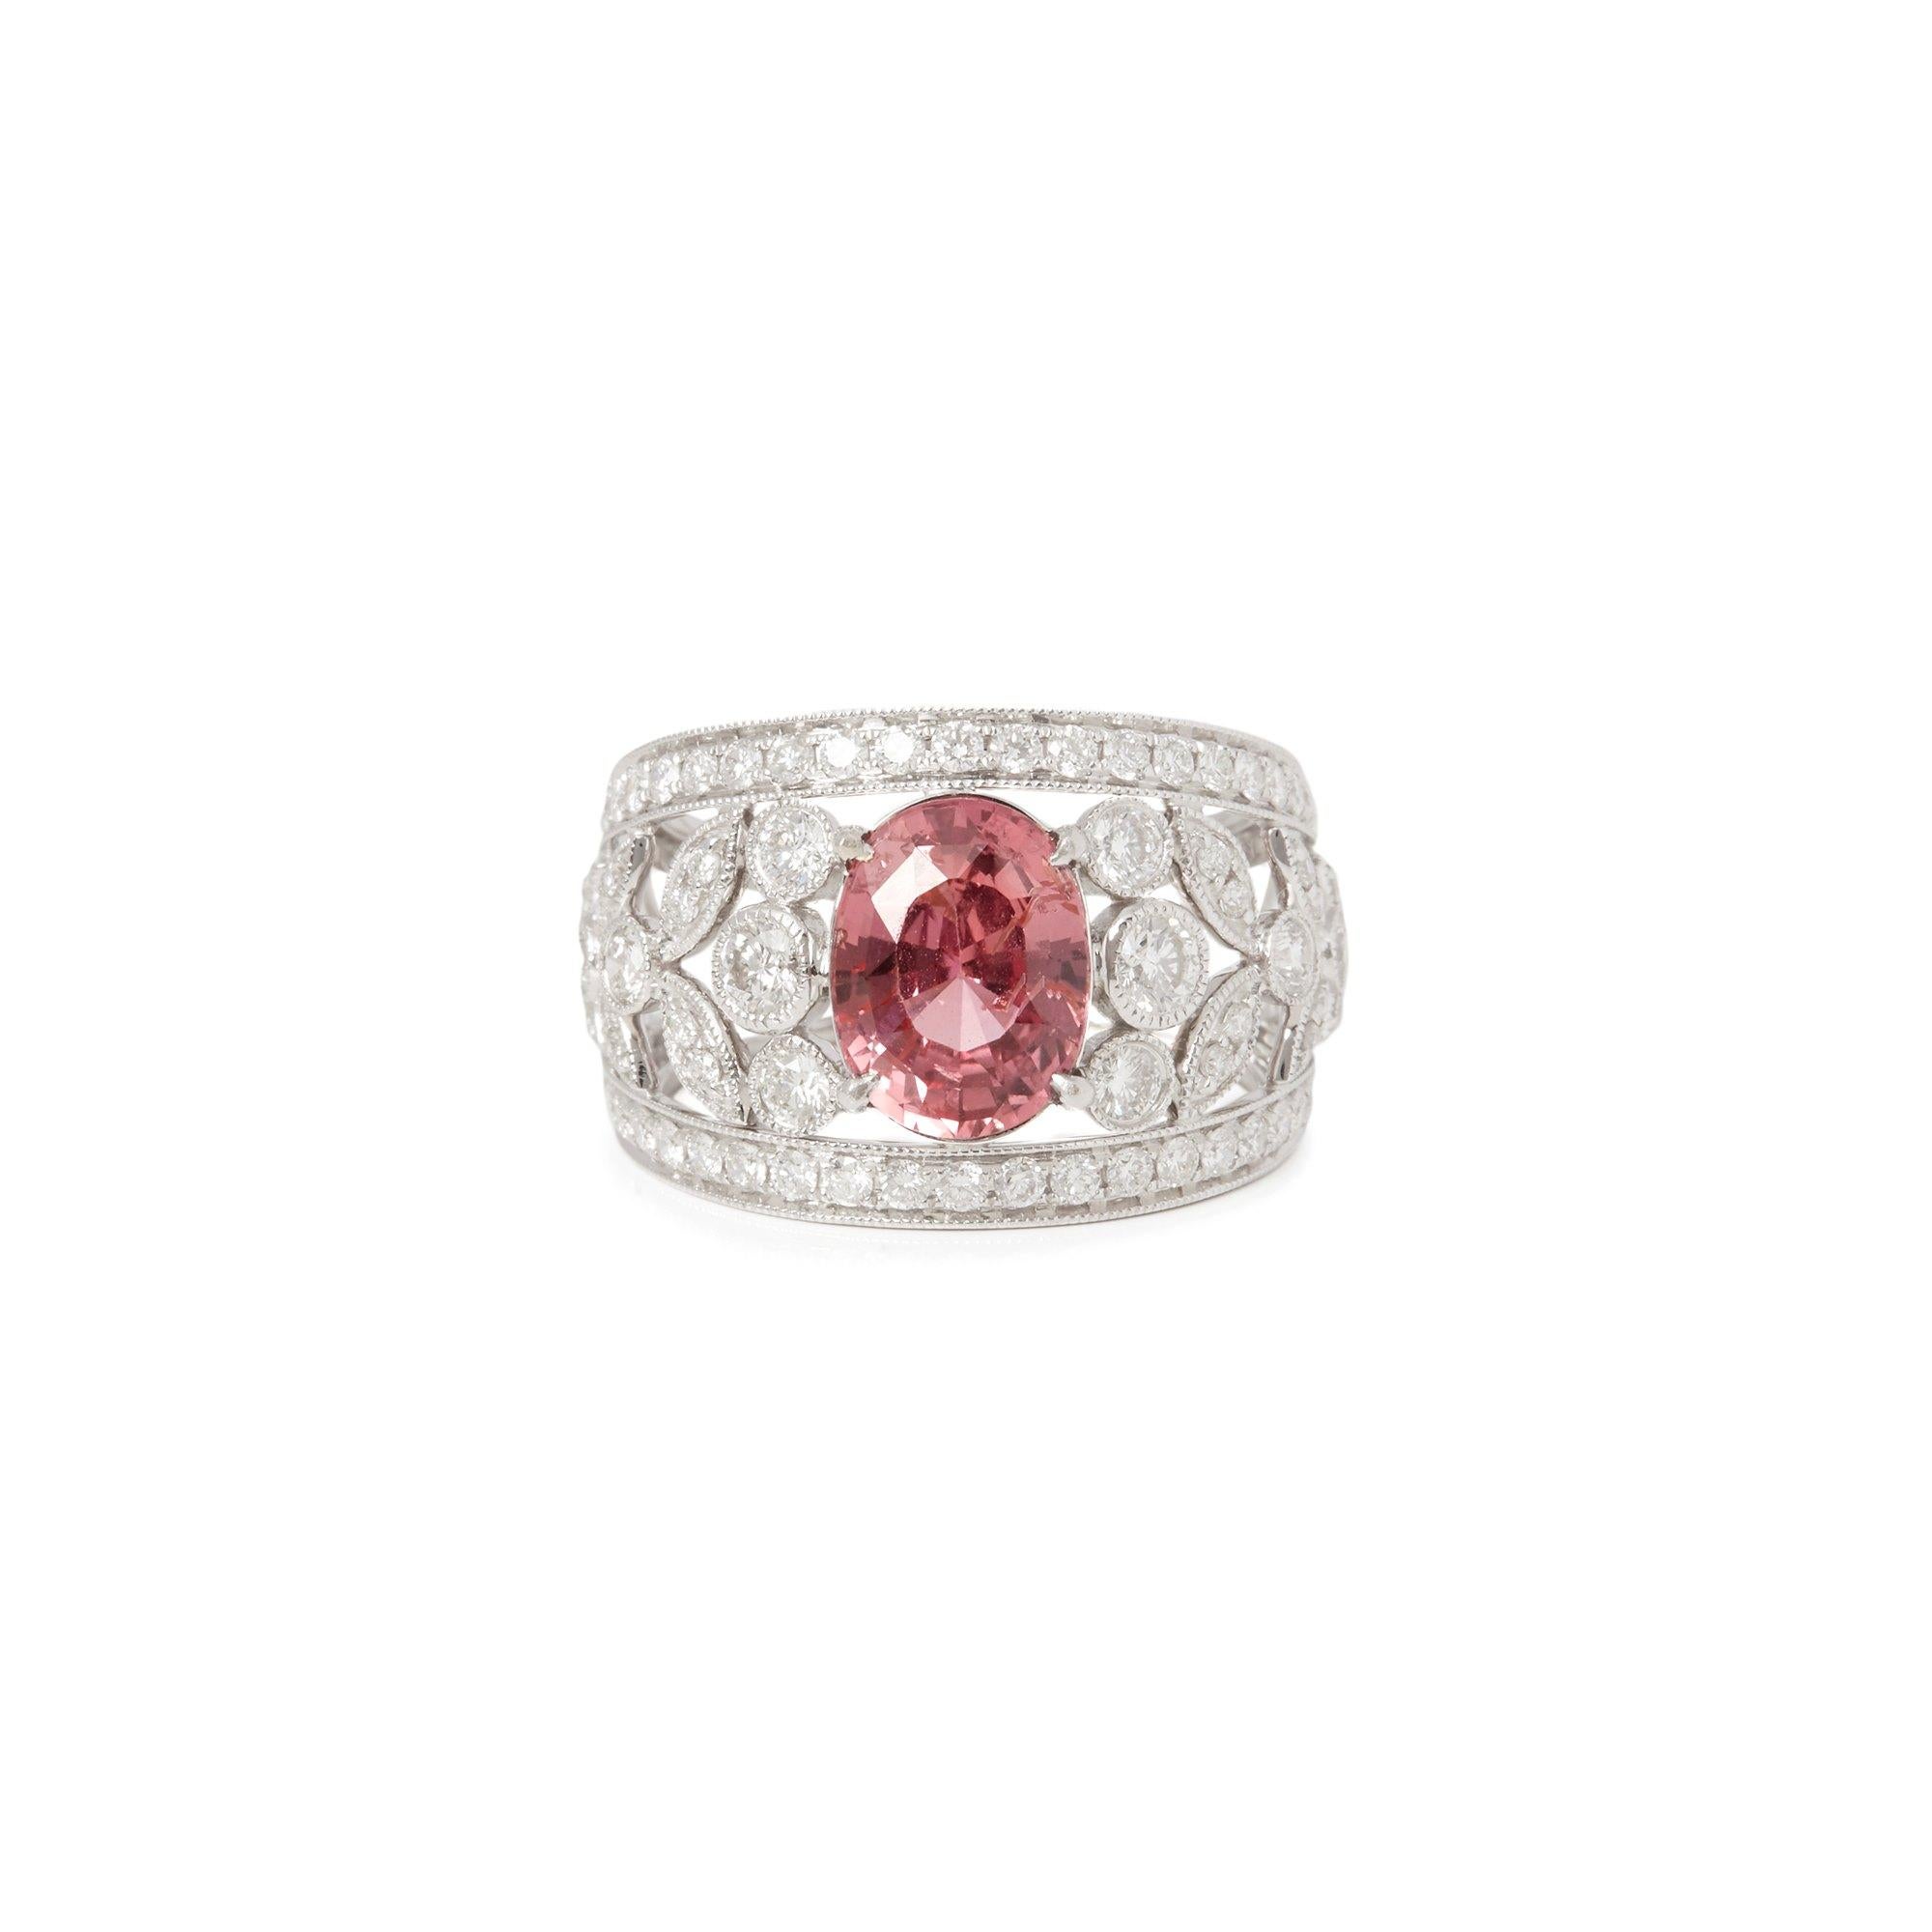 This ring designed by David Jerome is from his private collection and features one oval cut padparadscha Sapphire totalling 3.19cts sourced in Sri Lanka. Set with round brilliant cut Diamonds Totalling 1.56cts mounted in an 18k white gold setting.